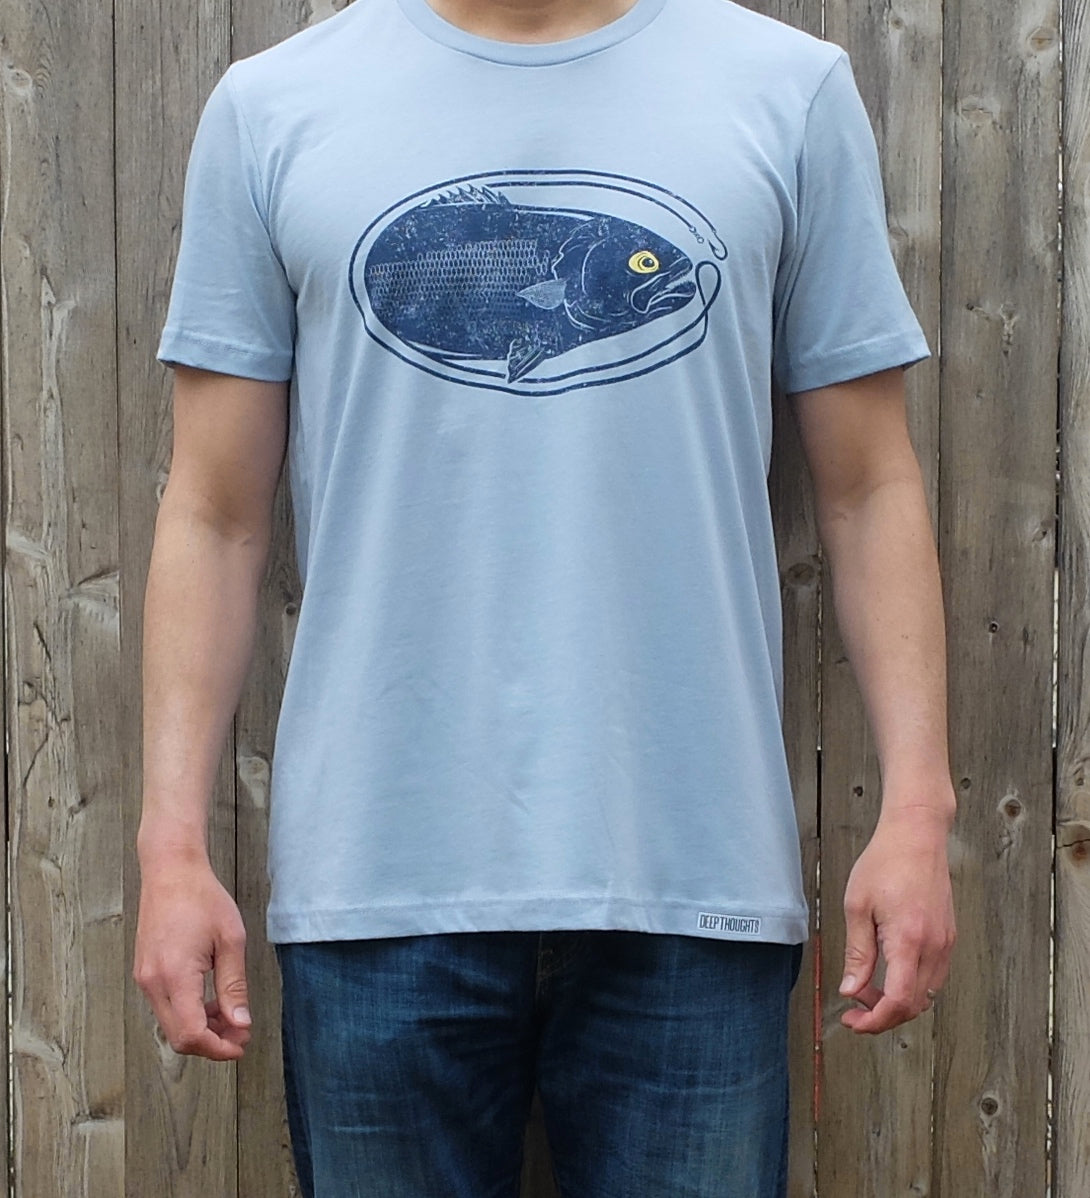 man wearing light blue cotton t-shirt with dark blue oval shaped bluefish fishing graphic